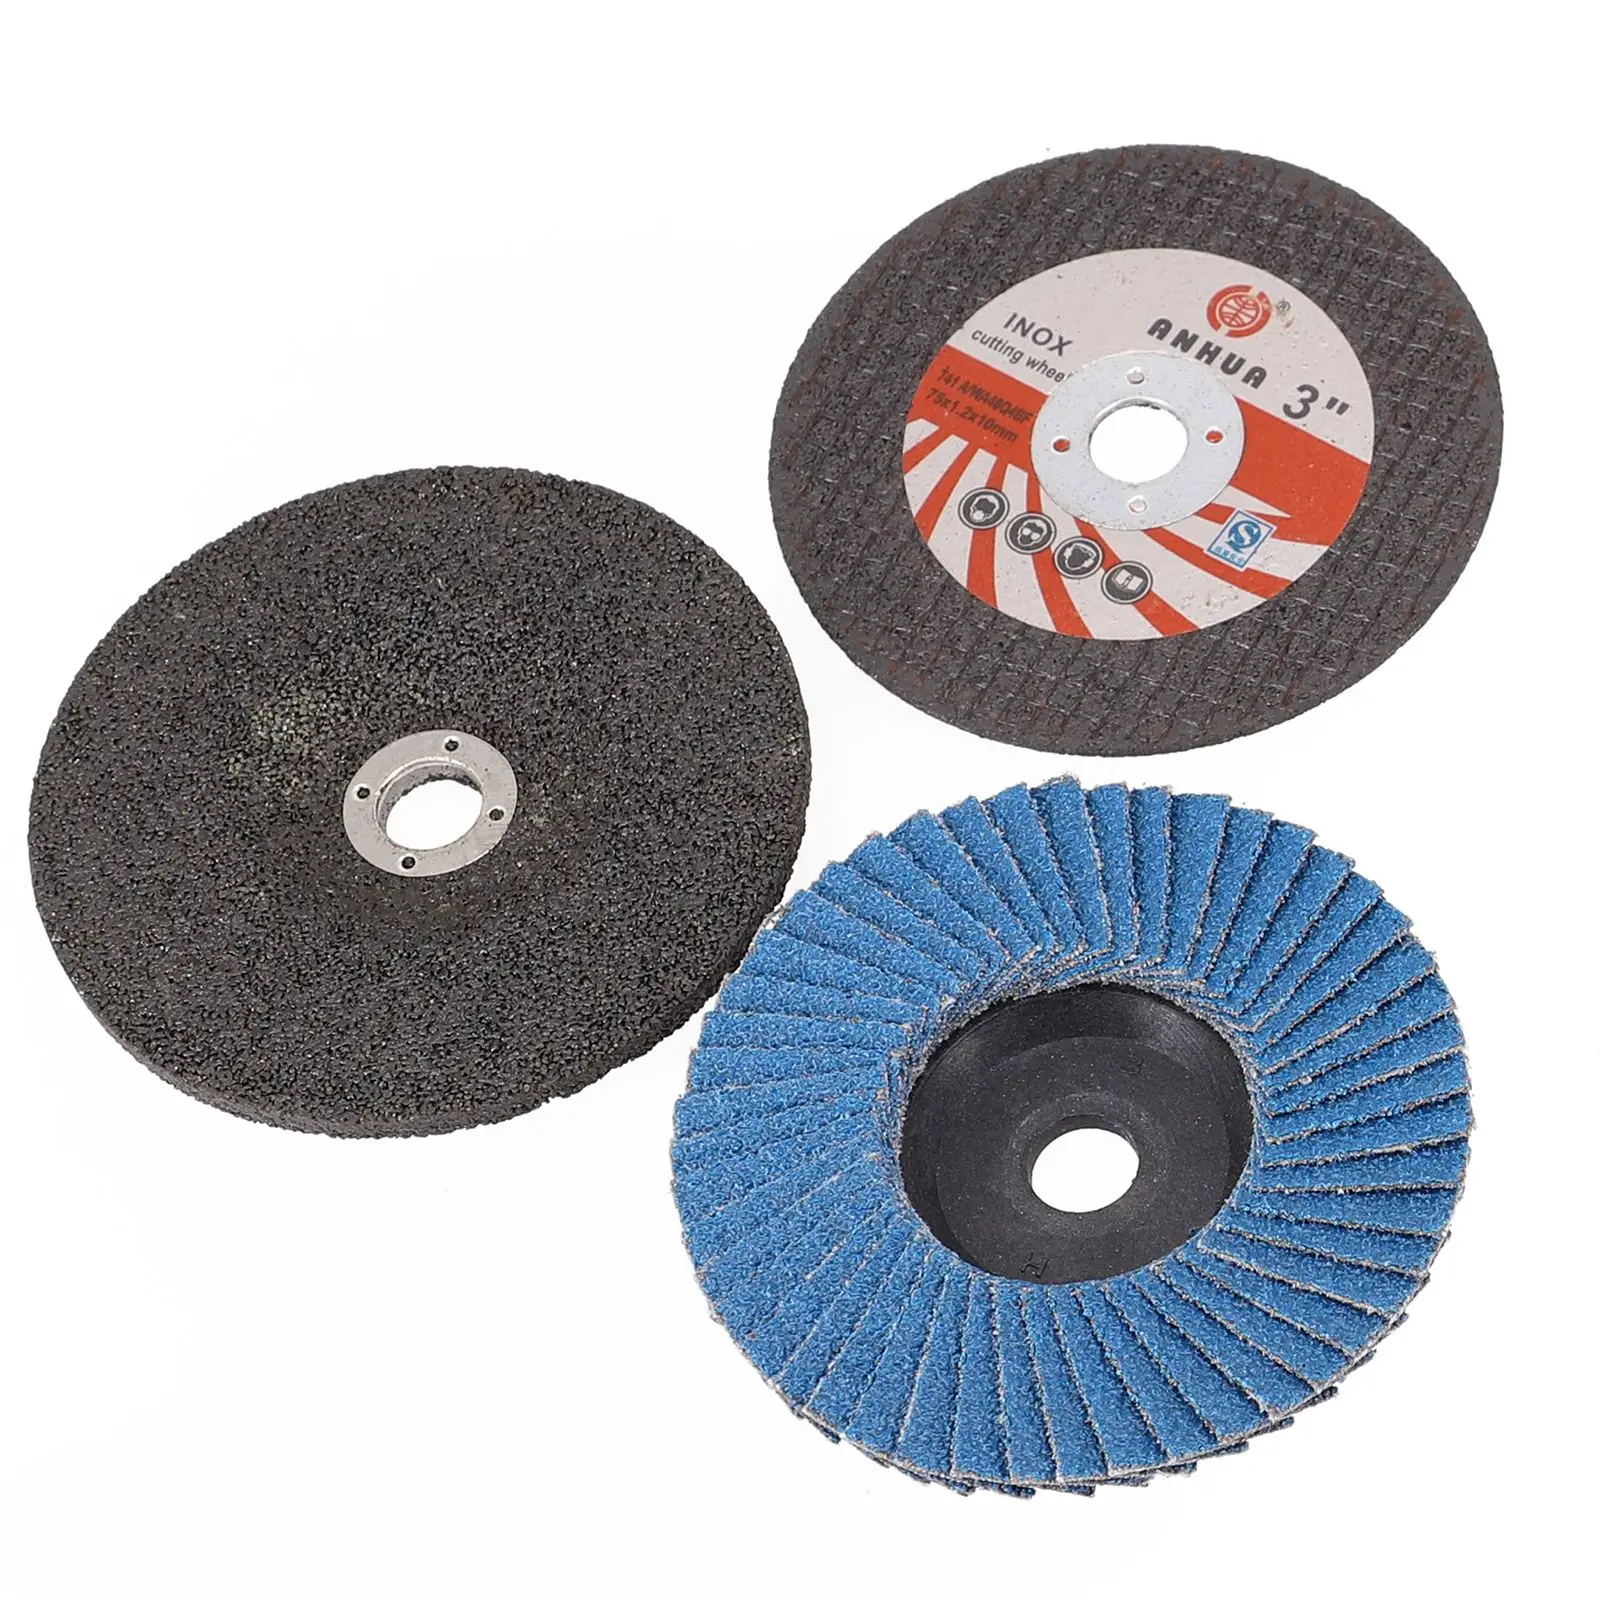 Brand New Cutting Disc Grinding Wheel Circular Saw Blade For Angle Grinder For Ceramic Tile Wood Polishing Disc 1 3pcs circular saw blade disc diamond disc blade dry or wet cutting wheel for angle grinder for wood glass cutting